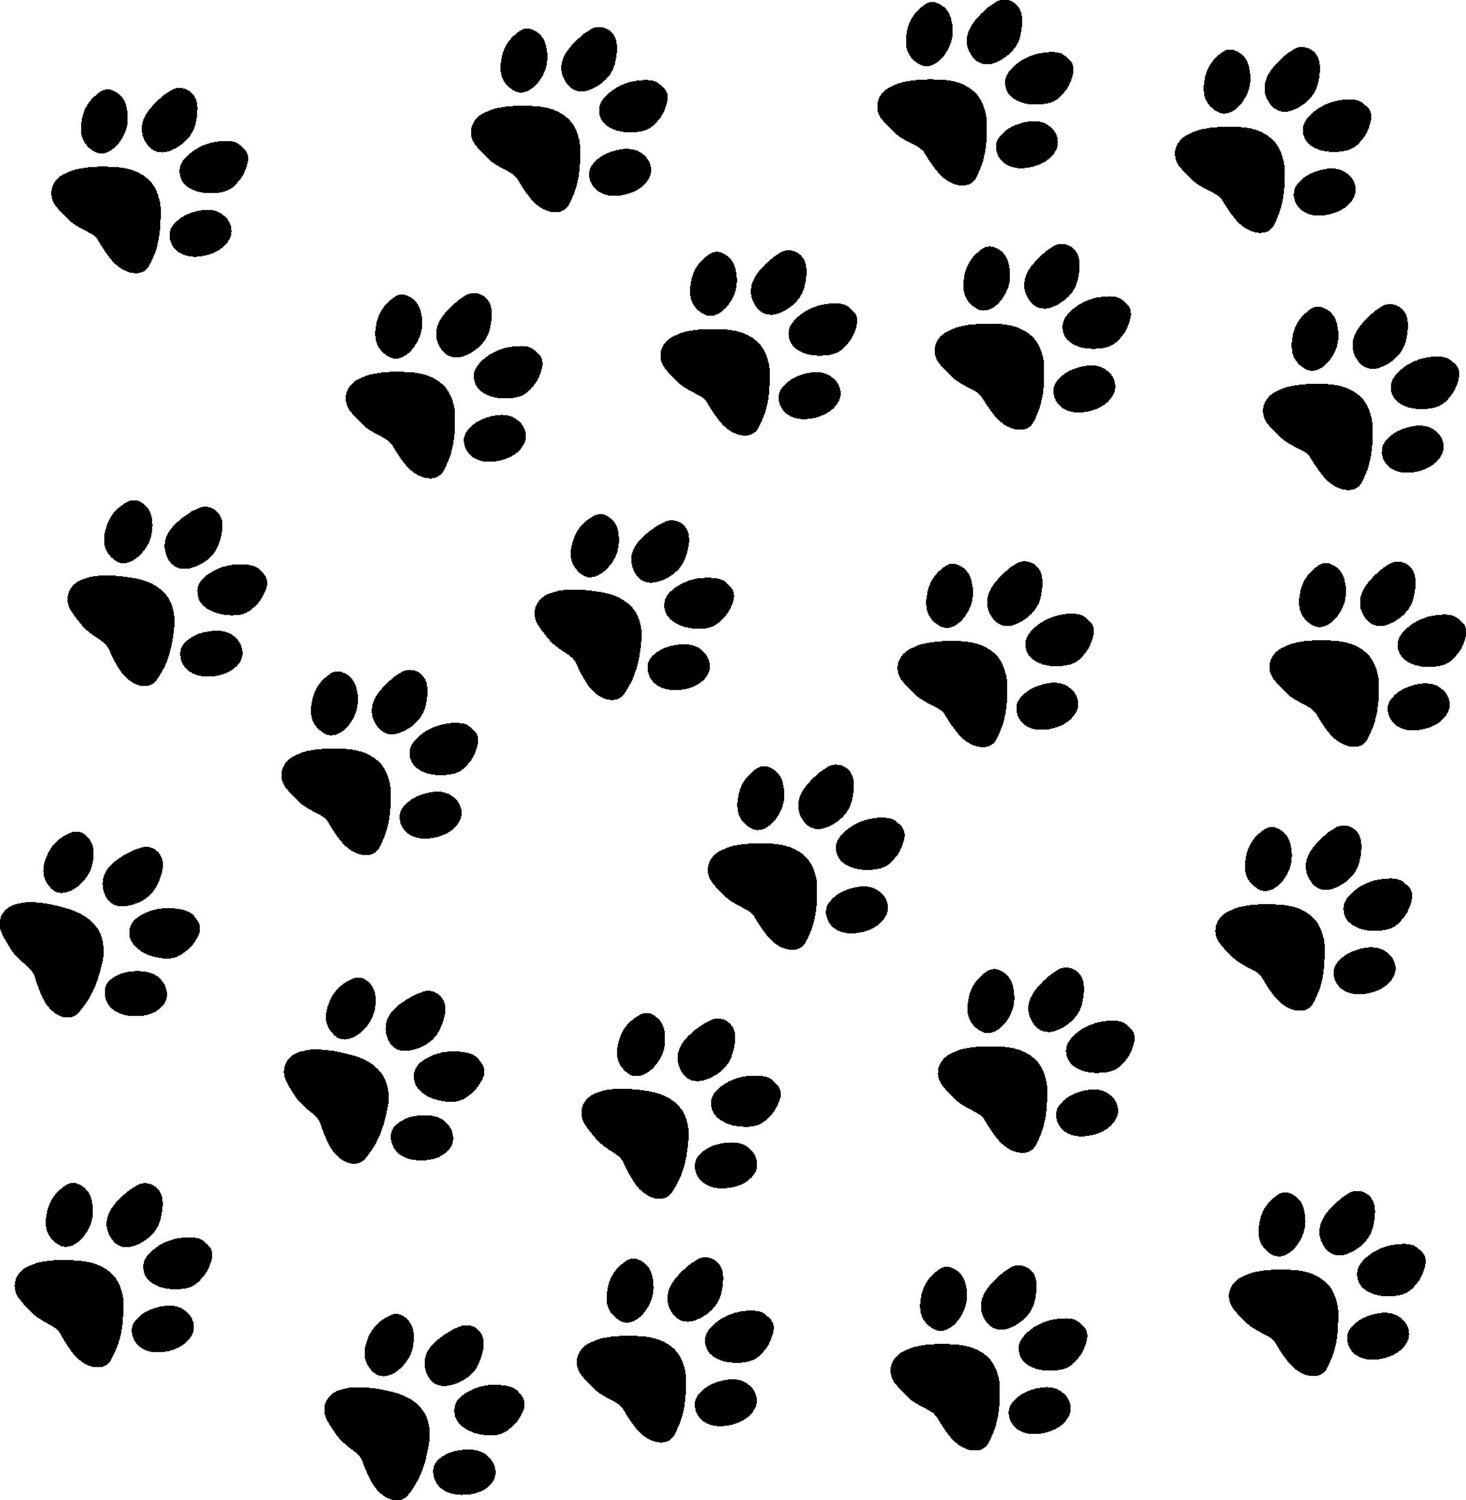 Pictures Of Paw Prints - ClipArt Best